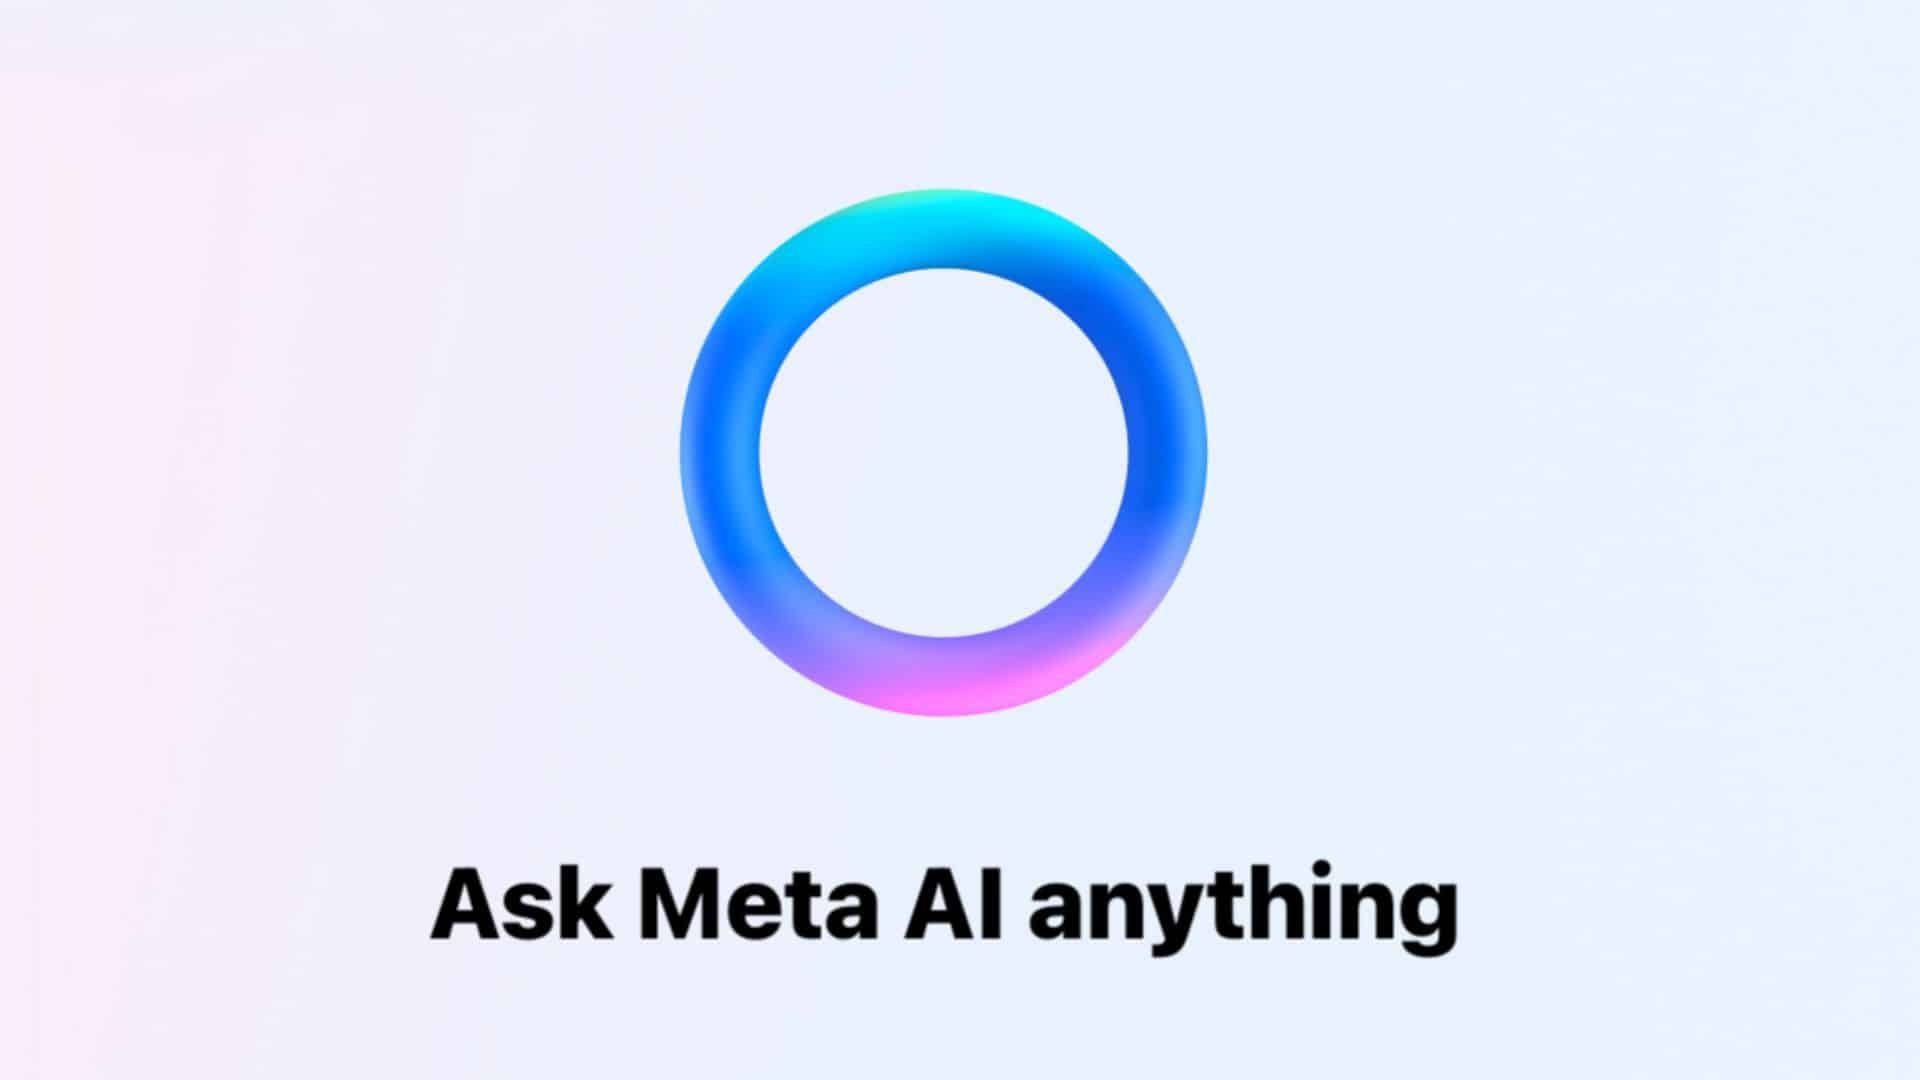 A vibrant gradient ring above the phrase ‘Ask Meta AI Anything’ on a light background.